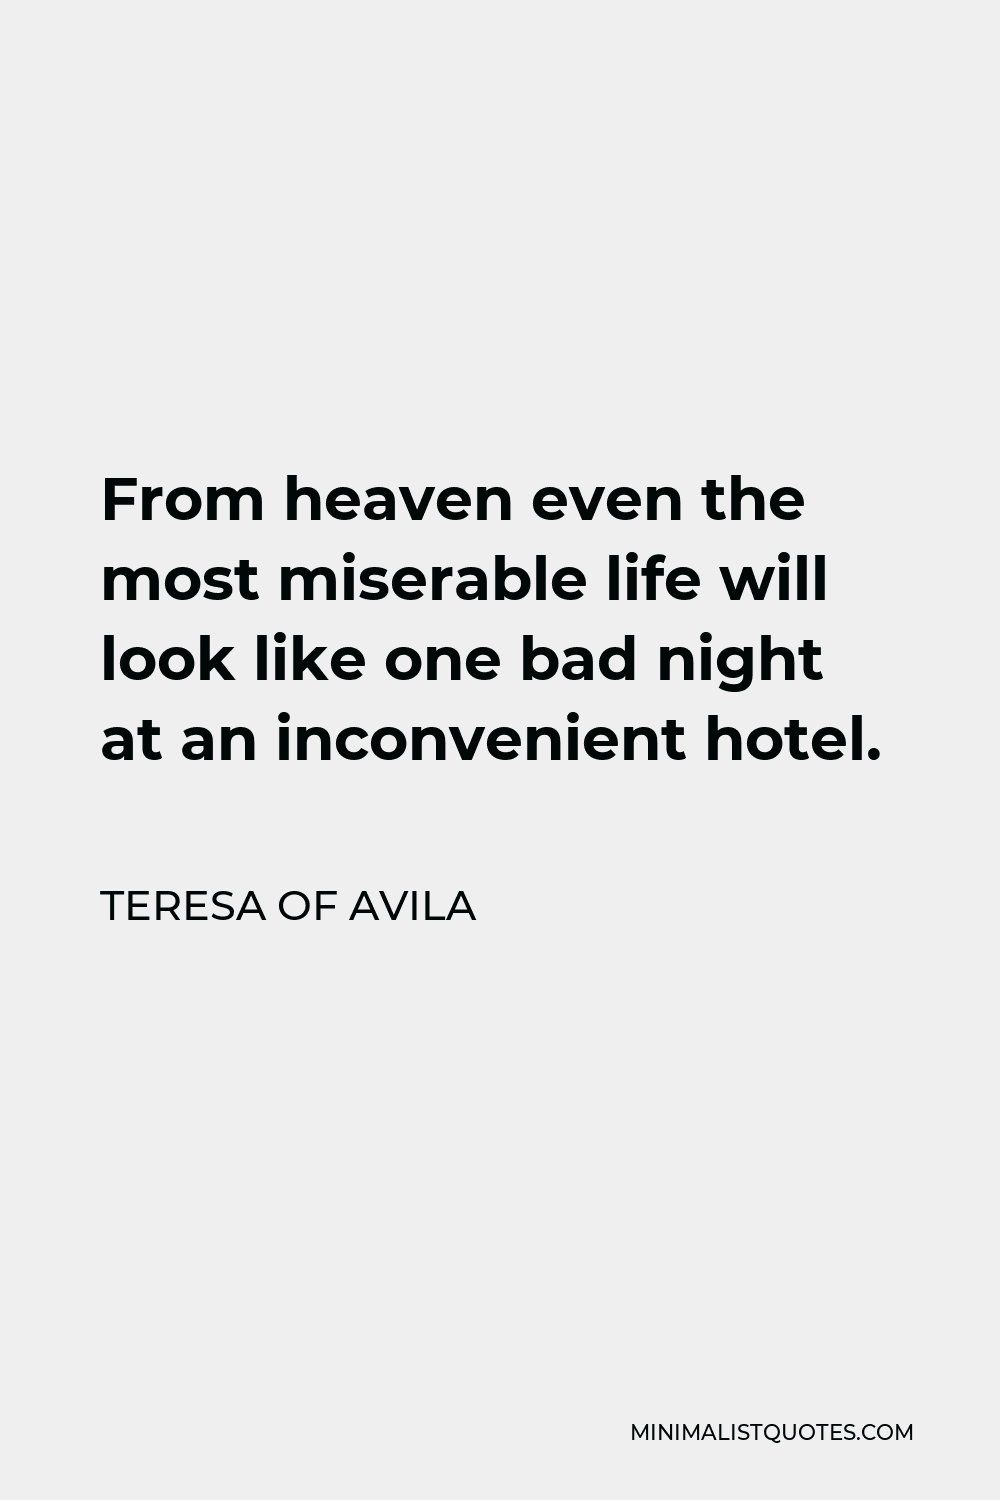 Teresa of Avila Quote - From heaven even the most miserable life will look like one bad night at an inconvenient hotel.